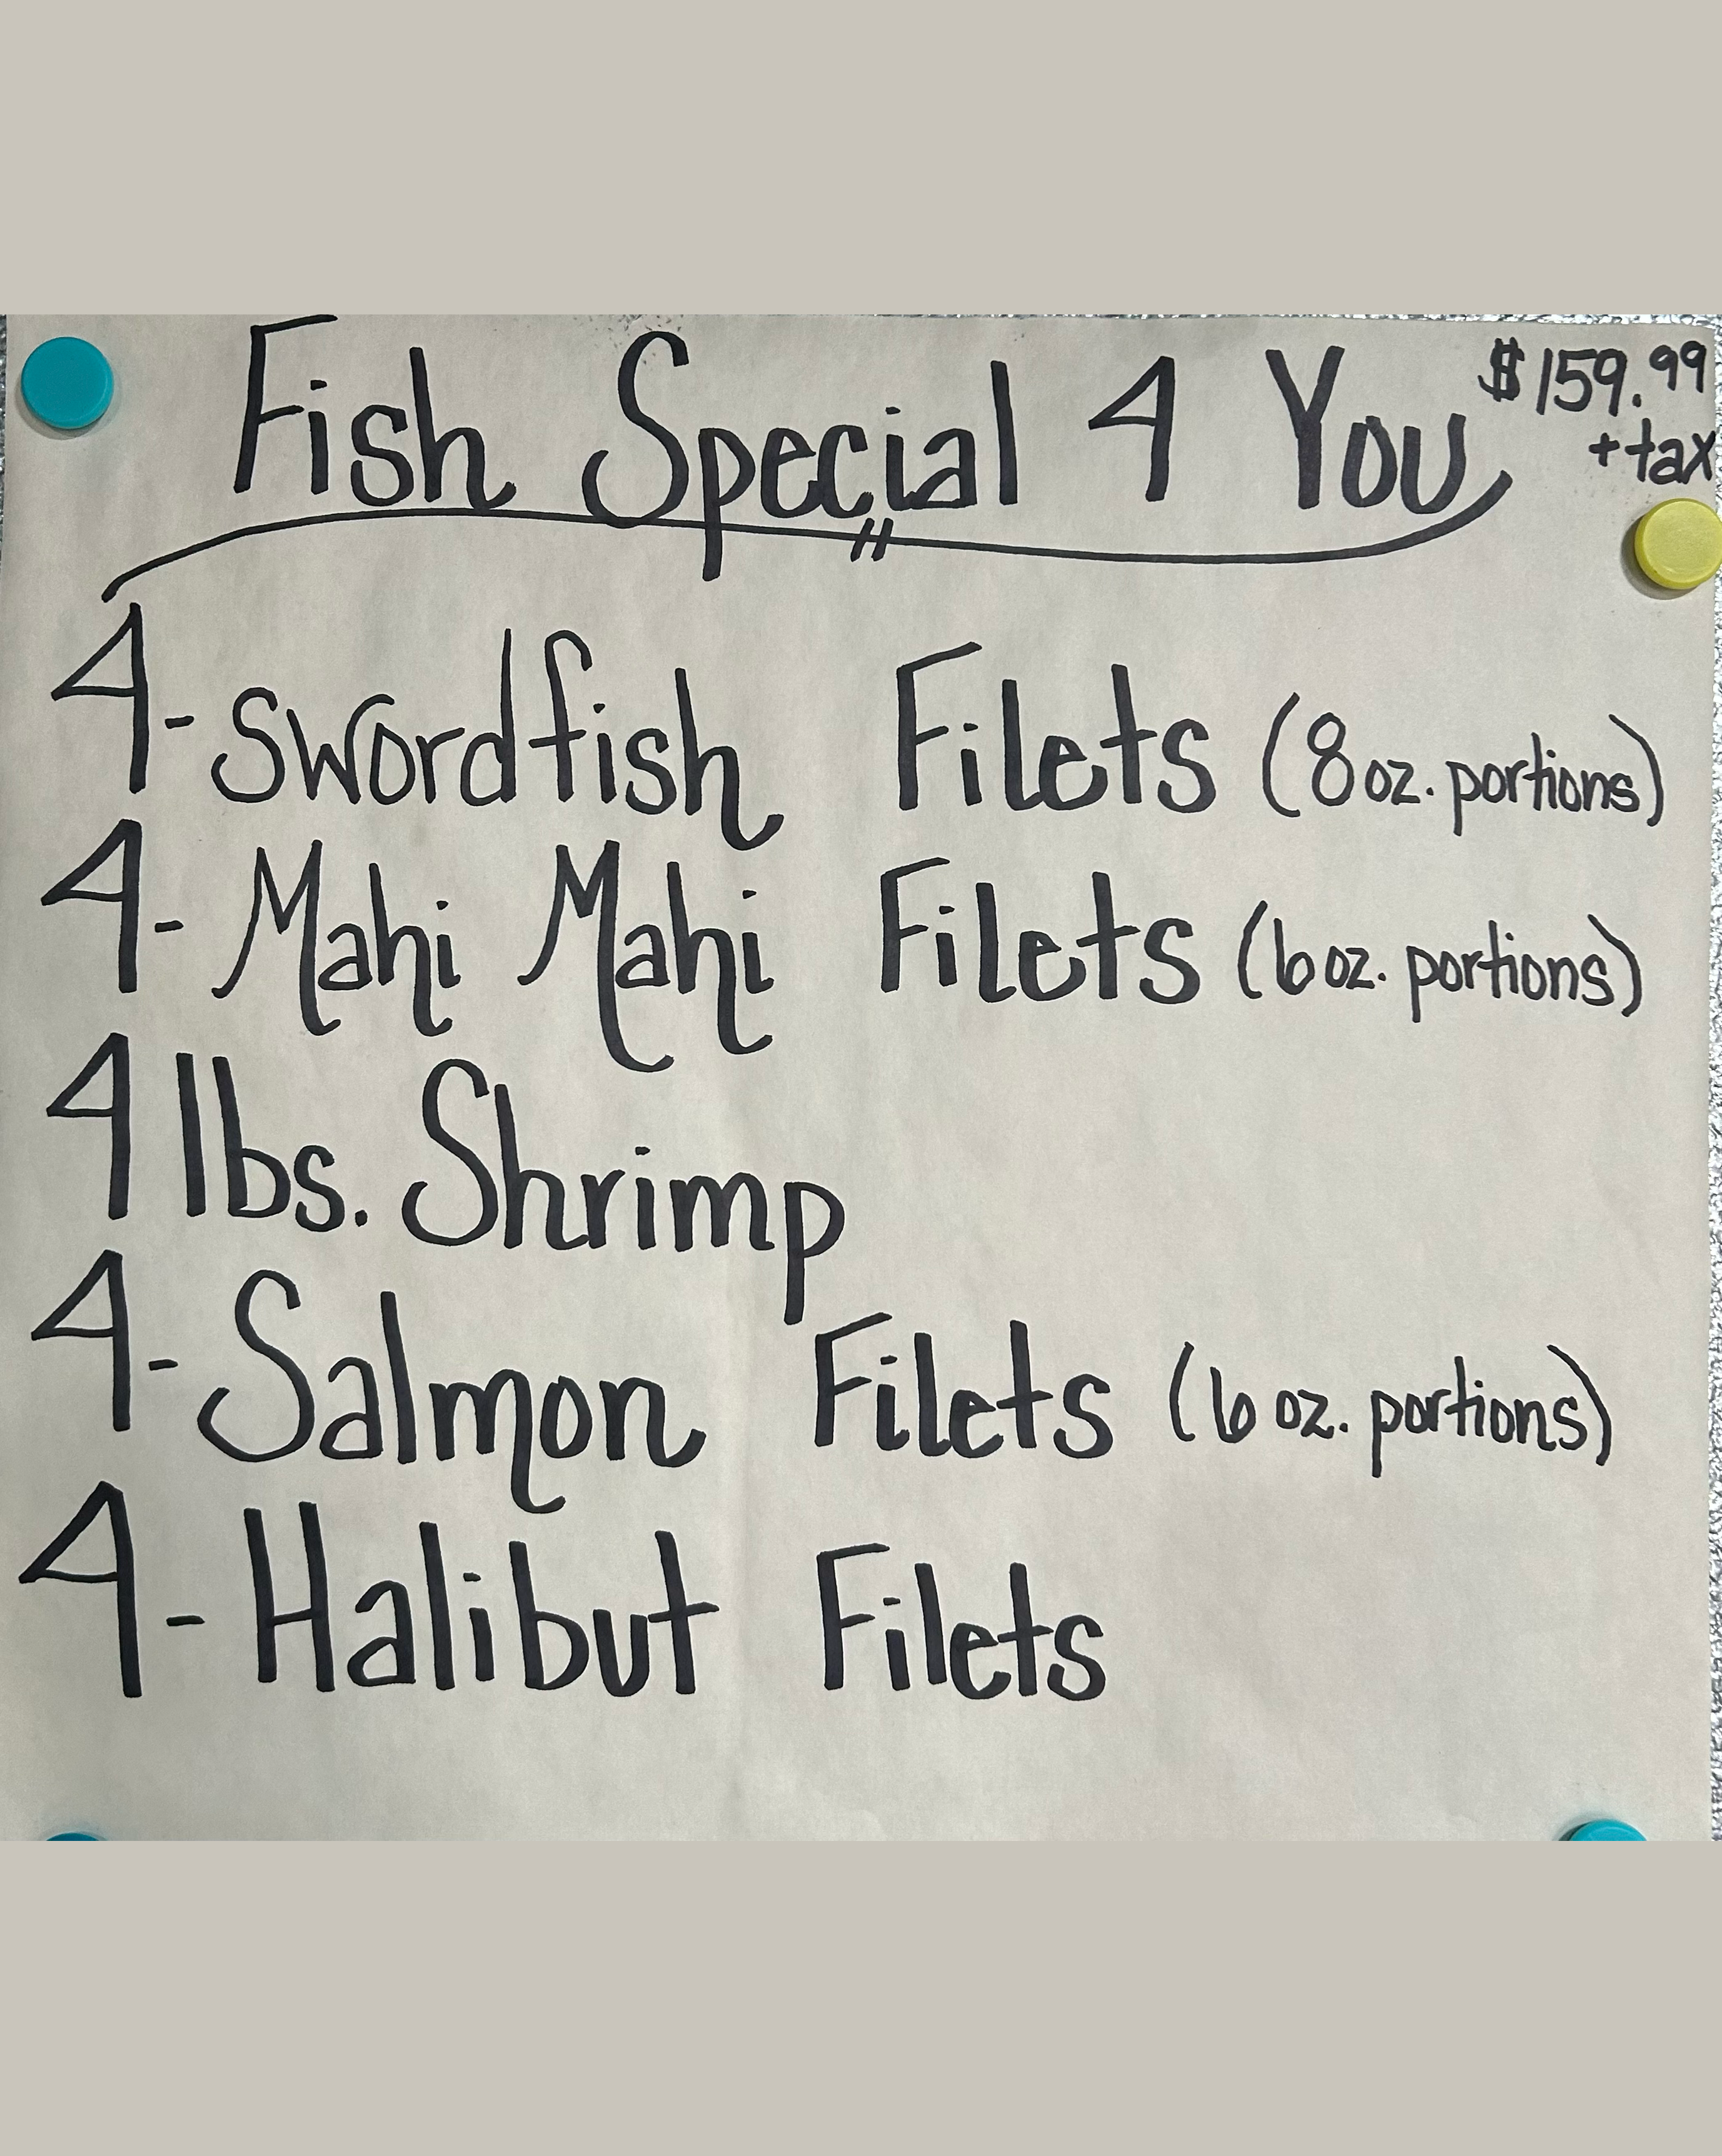 Fish Special 4 You